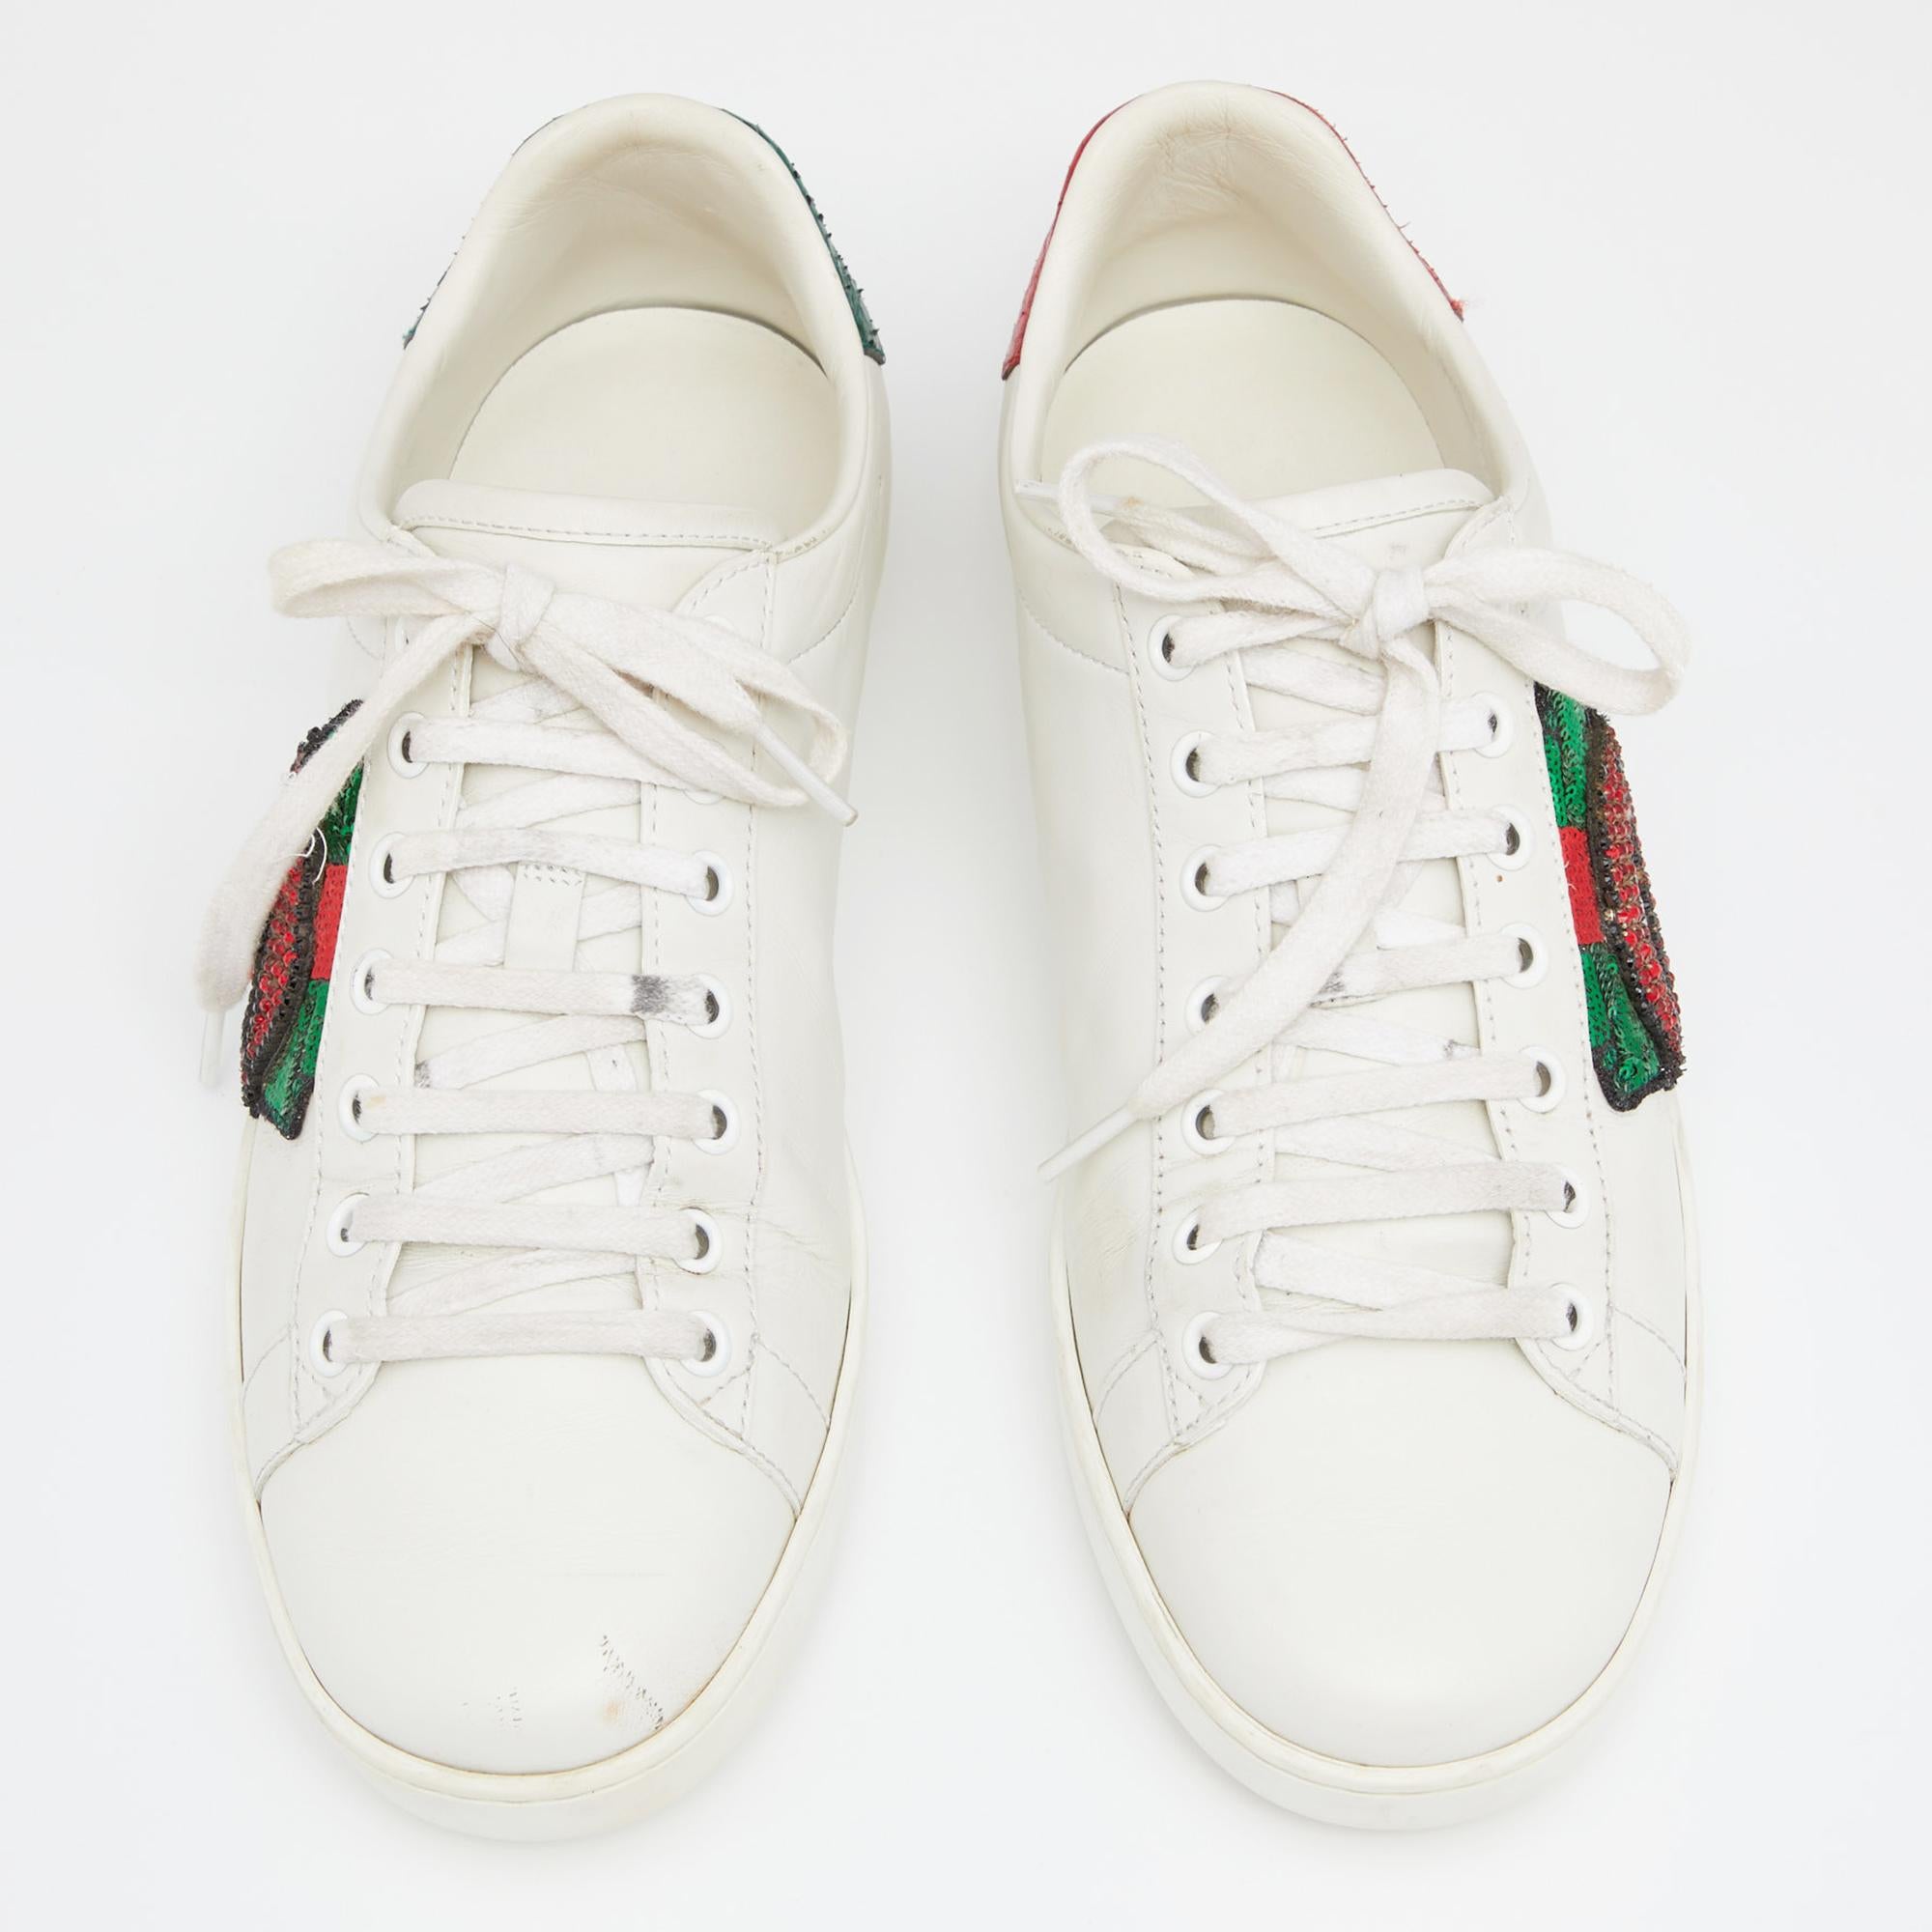 Made from leather, these Gucci sneakers are highlighted with sequin and crystal lip embellishments on the side. They display branded contrasting trims on the counter, lace-up vamps, and rests on comfortable rubber soles.

